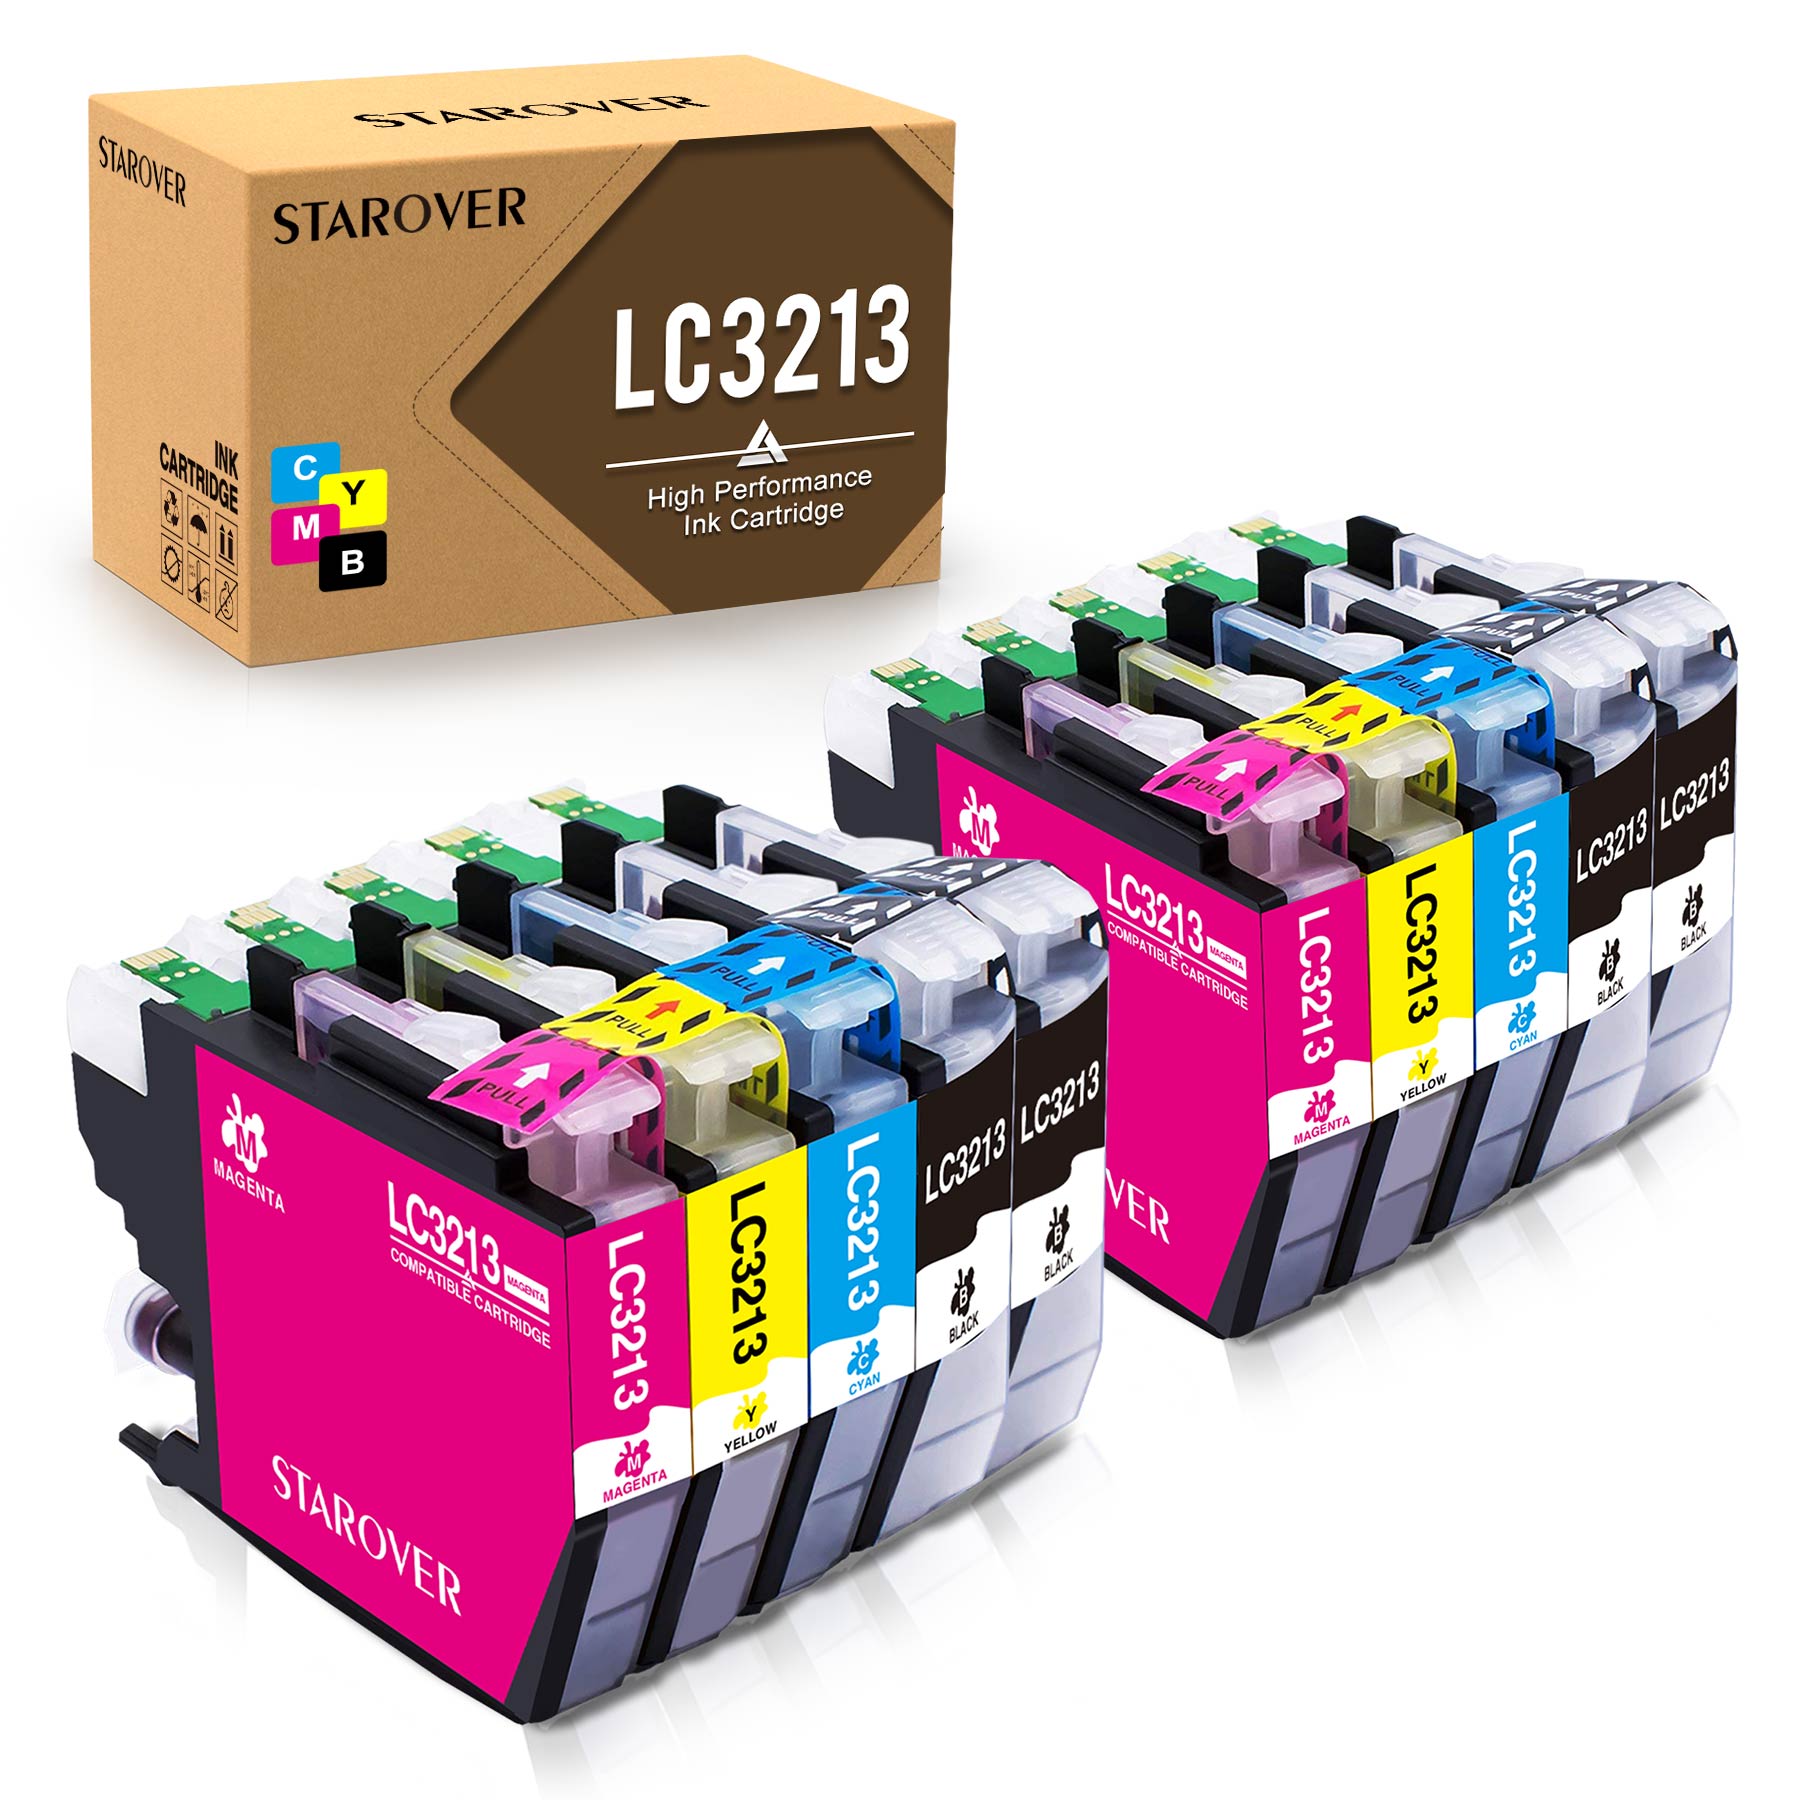 Mooho 934XL 935XL Ink Replacement for HP 934 935 XL Ink Cartridges for  Officejet Pro 6830 6230 6835 6812 6815 6820 6220 6800 , Black Cyan Magenta